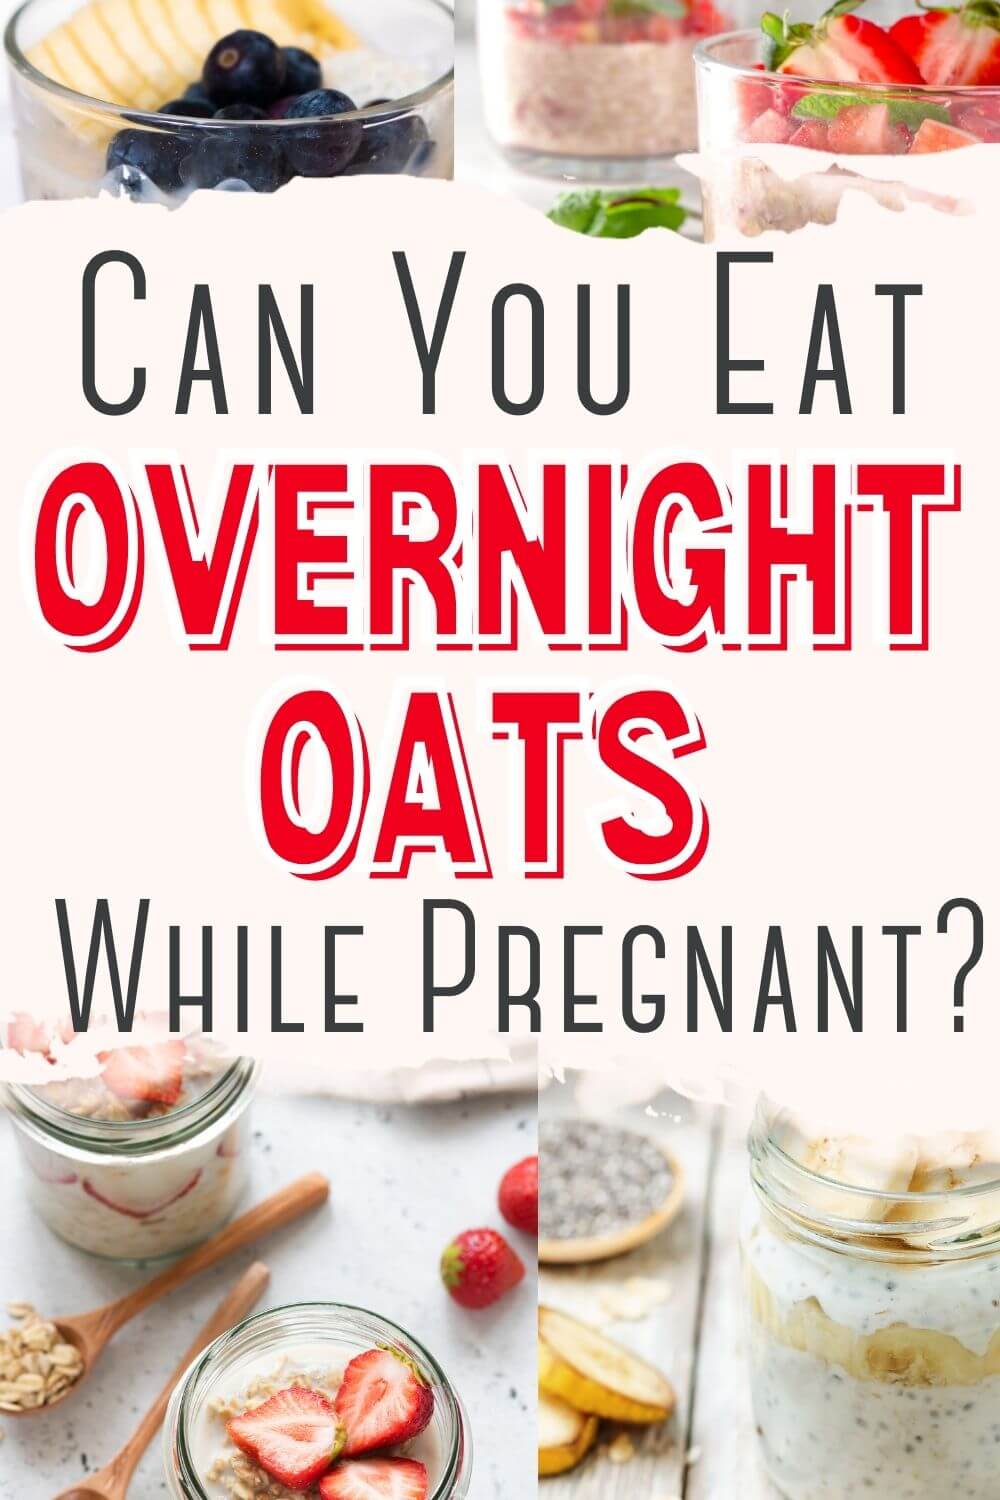 Can you eat overnight oats while pregnant?